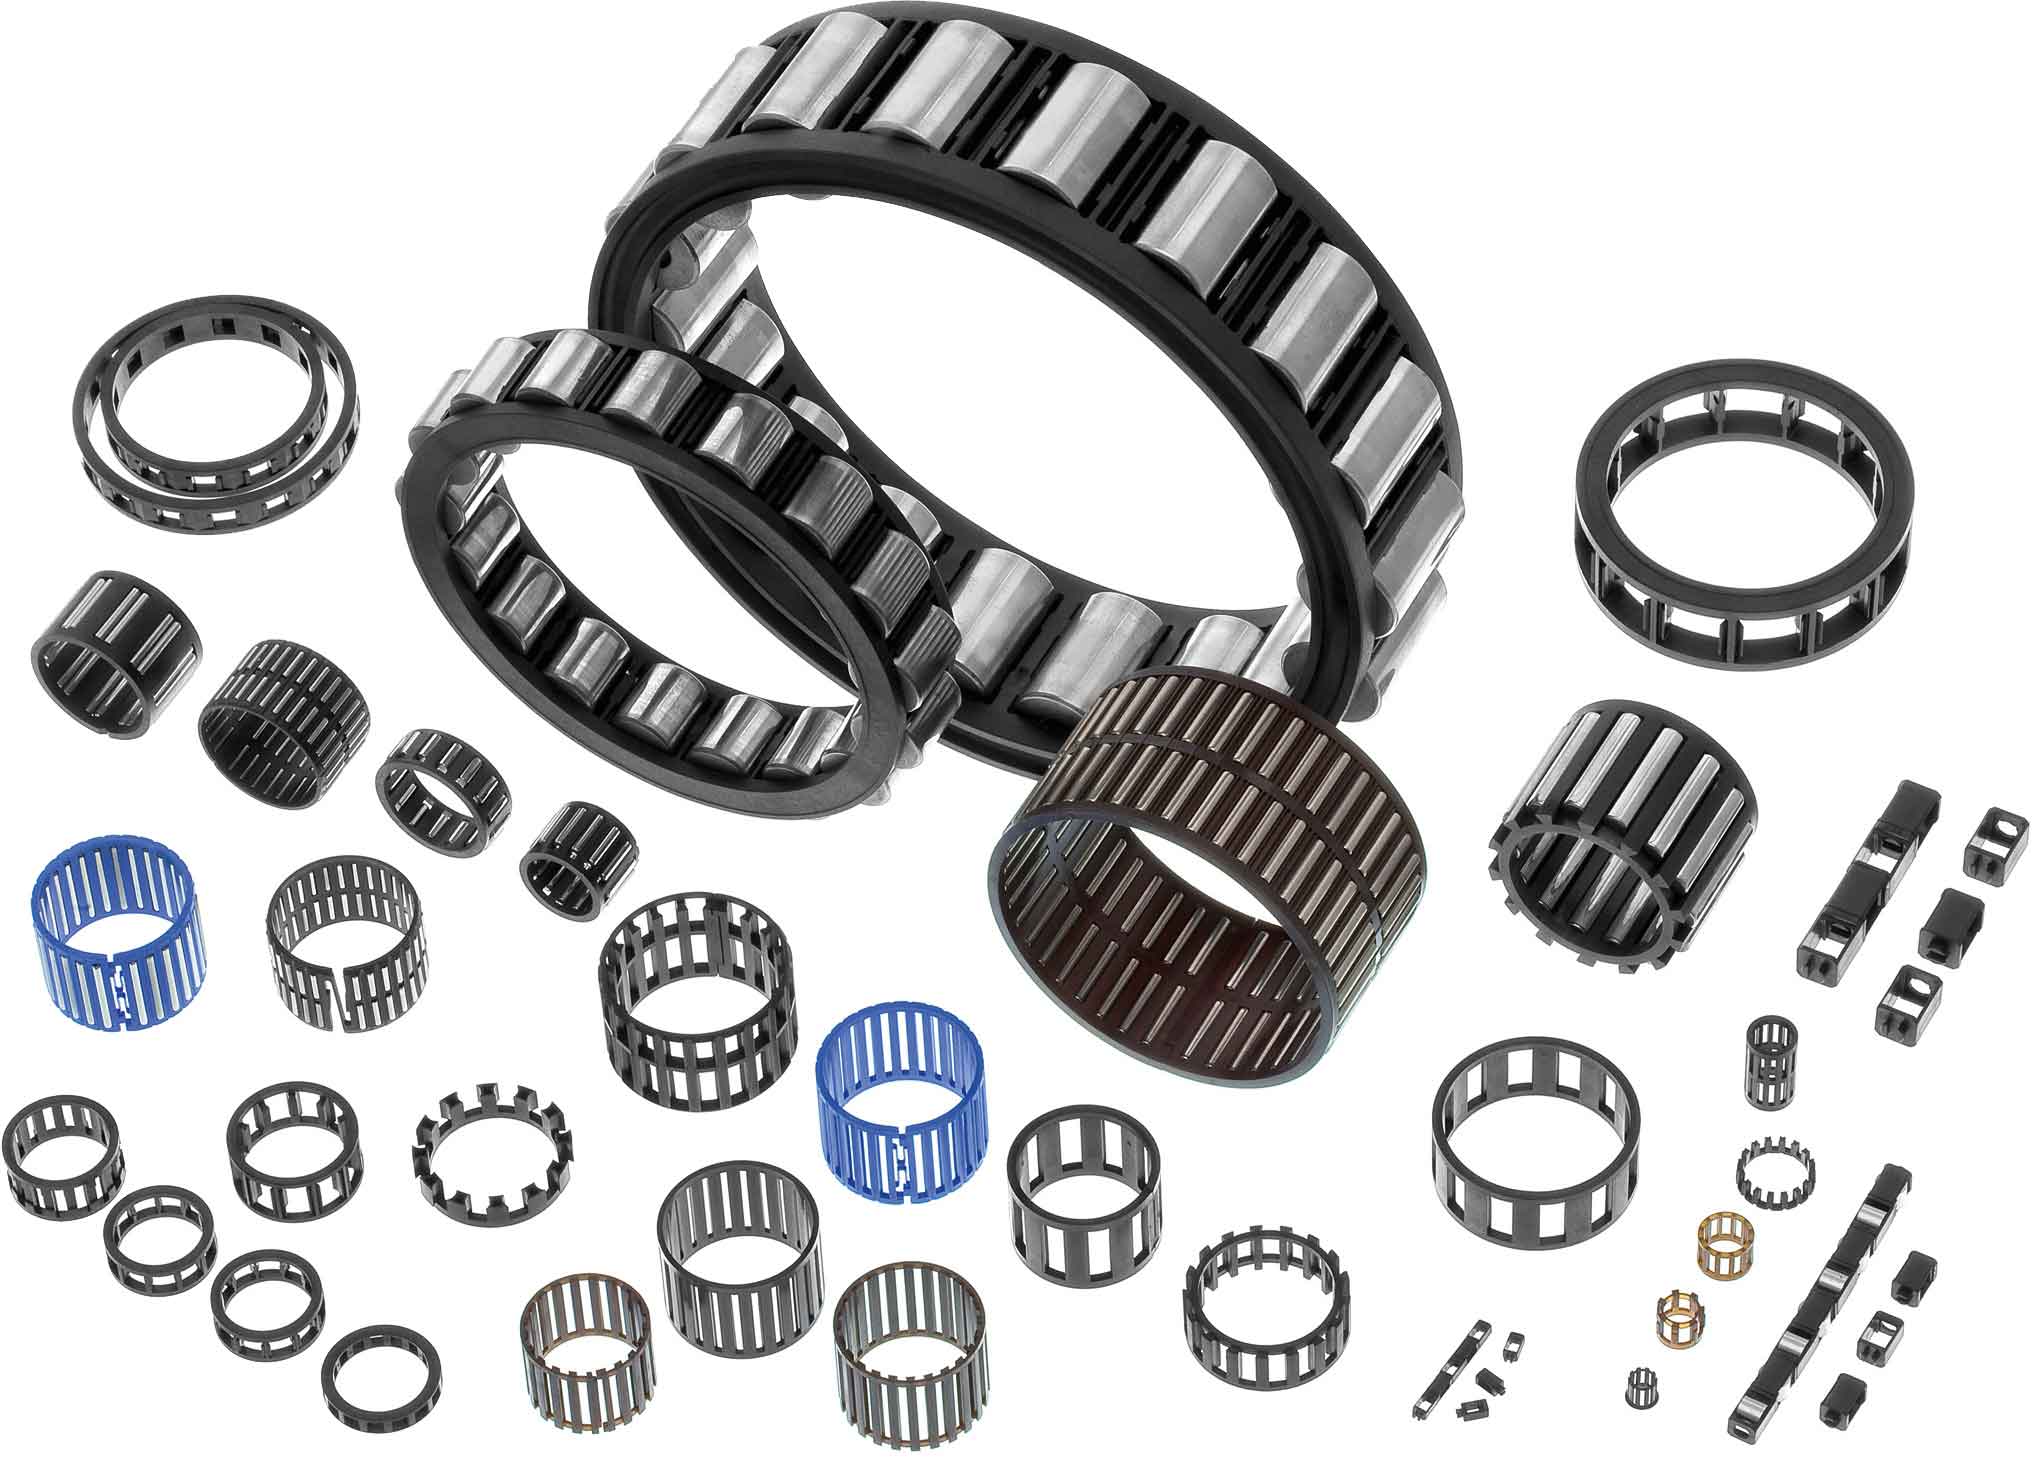 Overview of various bearing cages in all shapes and colours